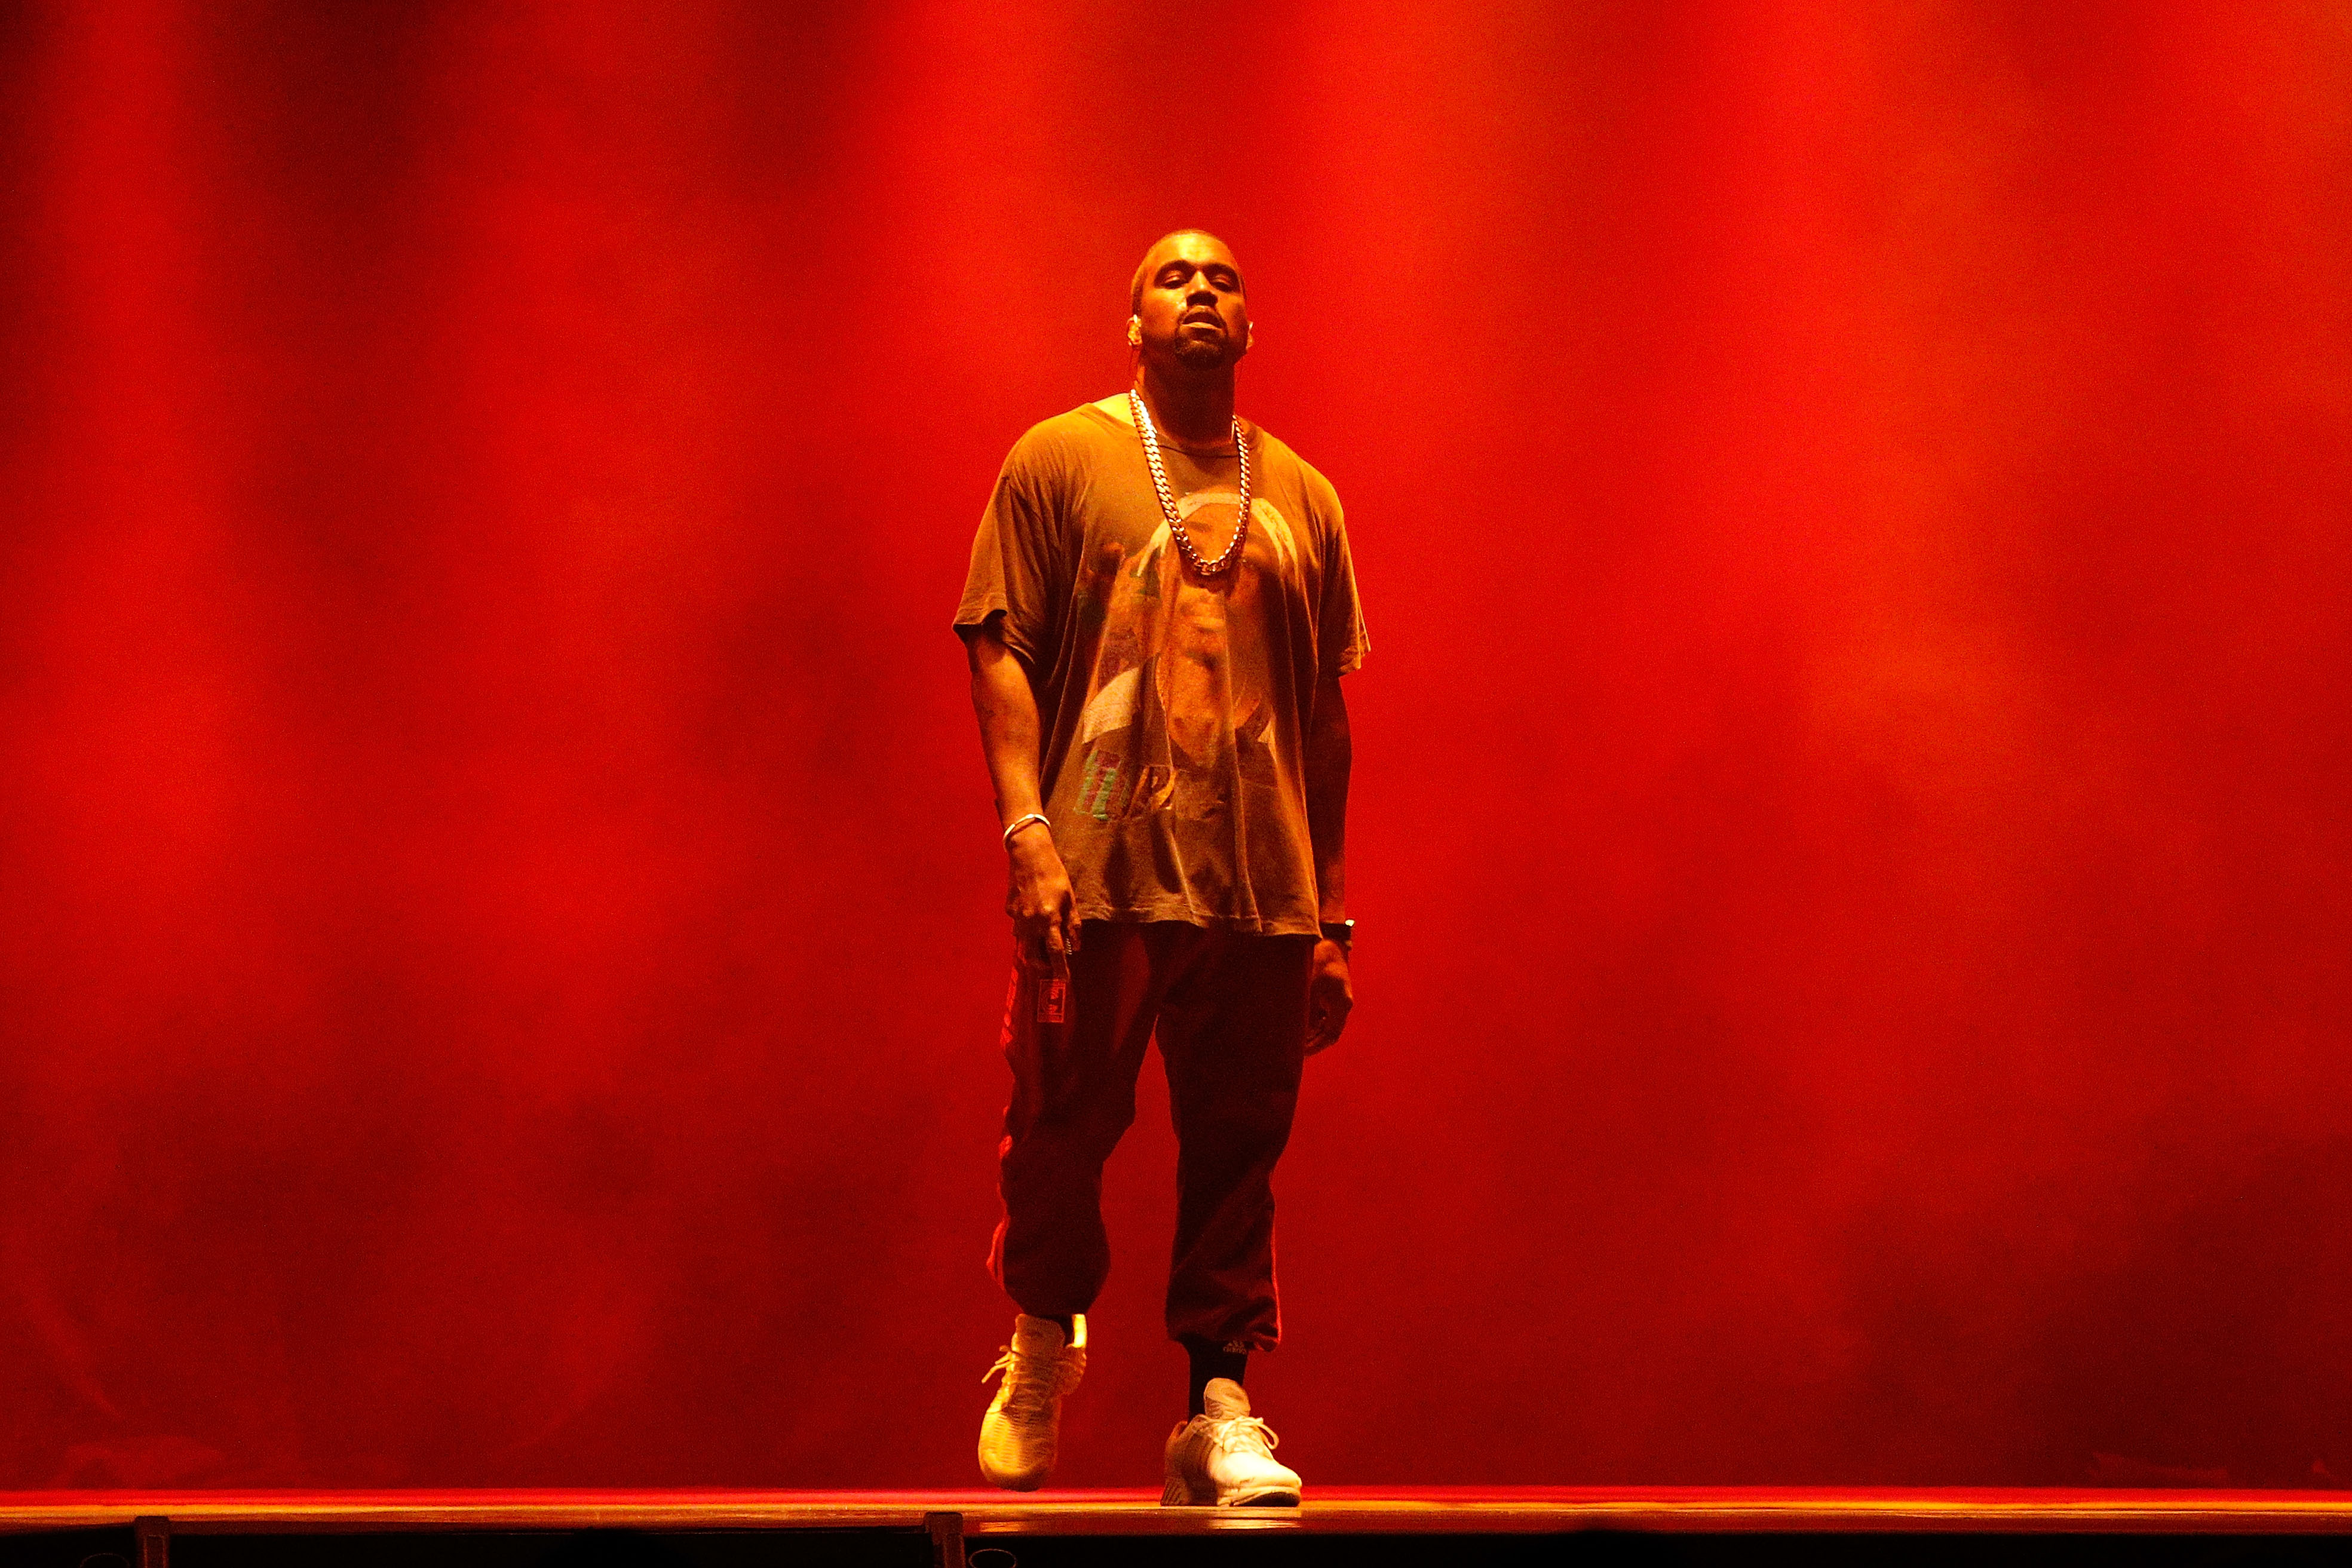 You Can Stream Kanye West’s New Album YE for Free. Here’s How to Listen